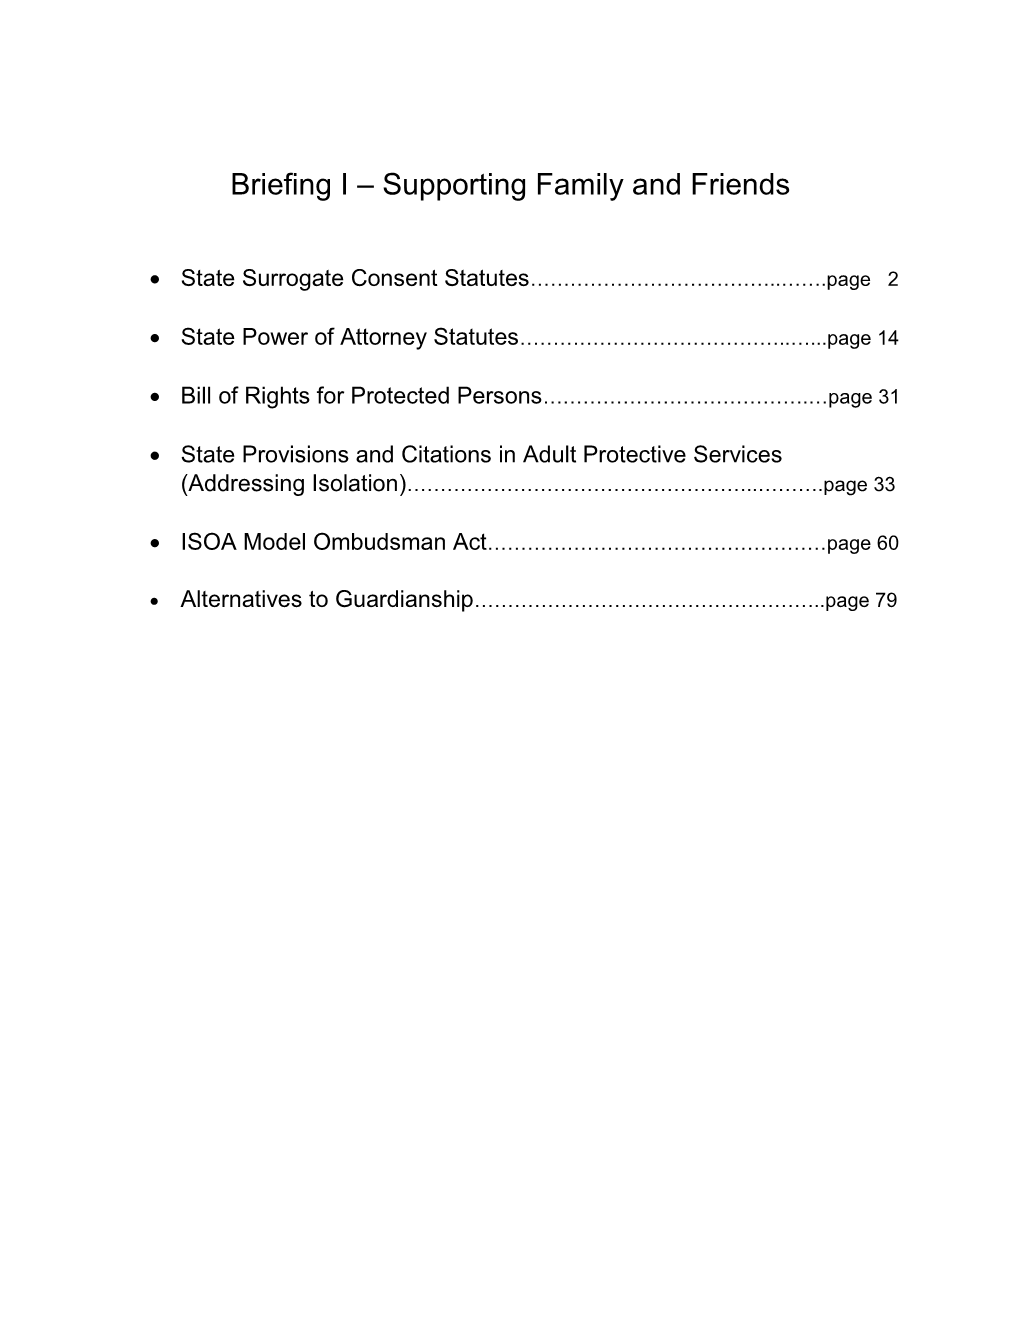 Briefing I – Supporting Family and Friends